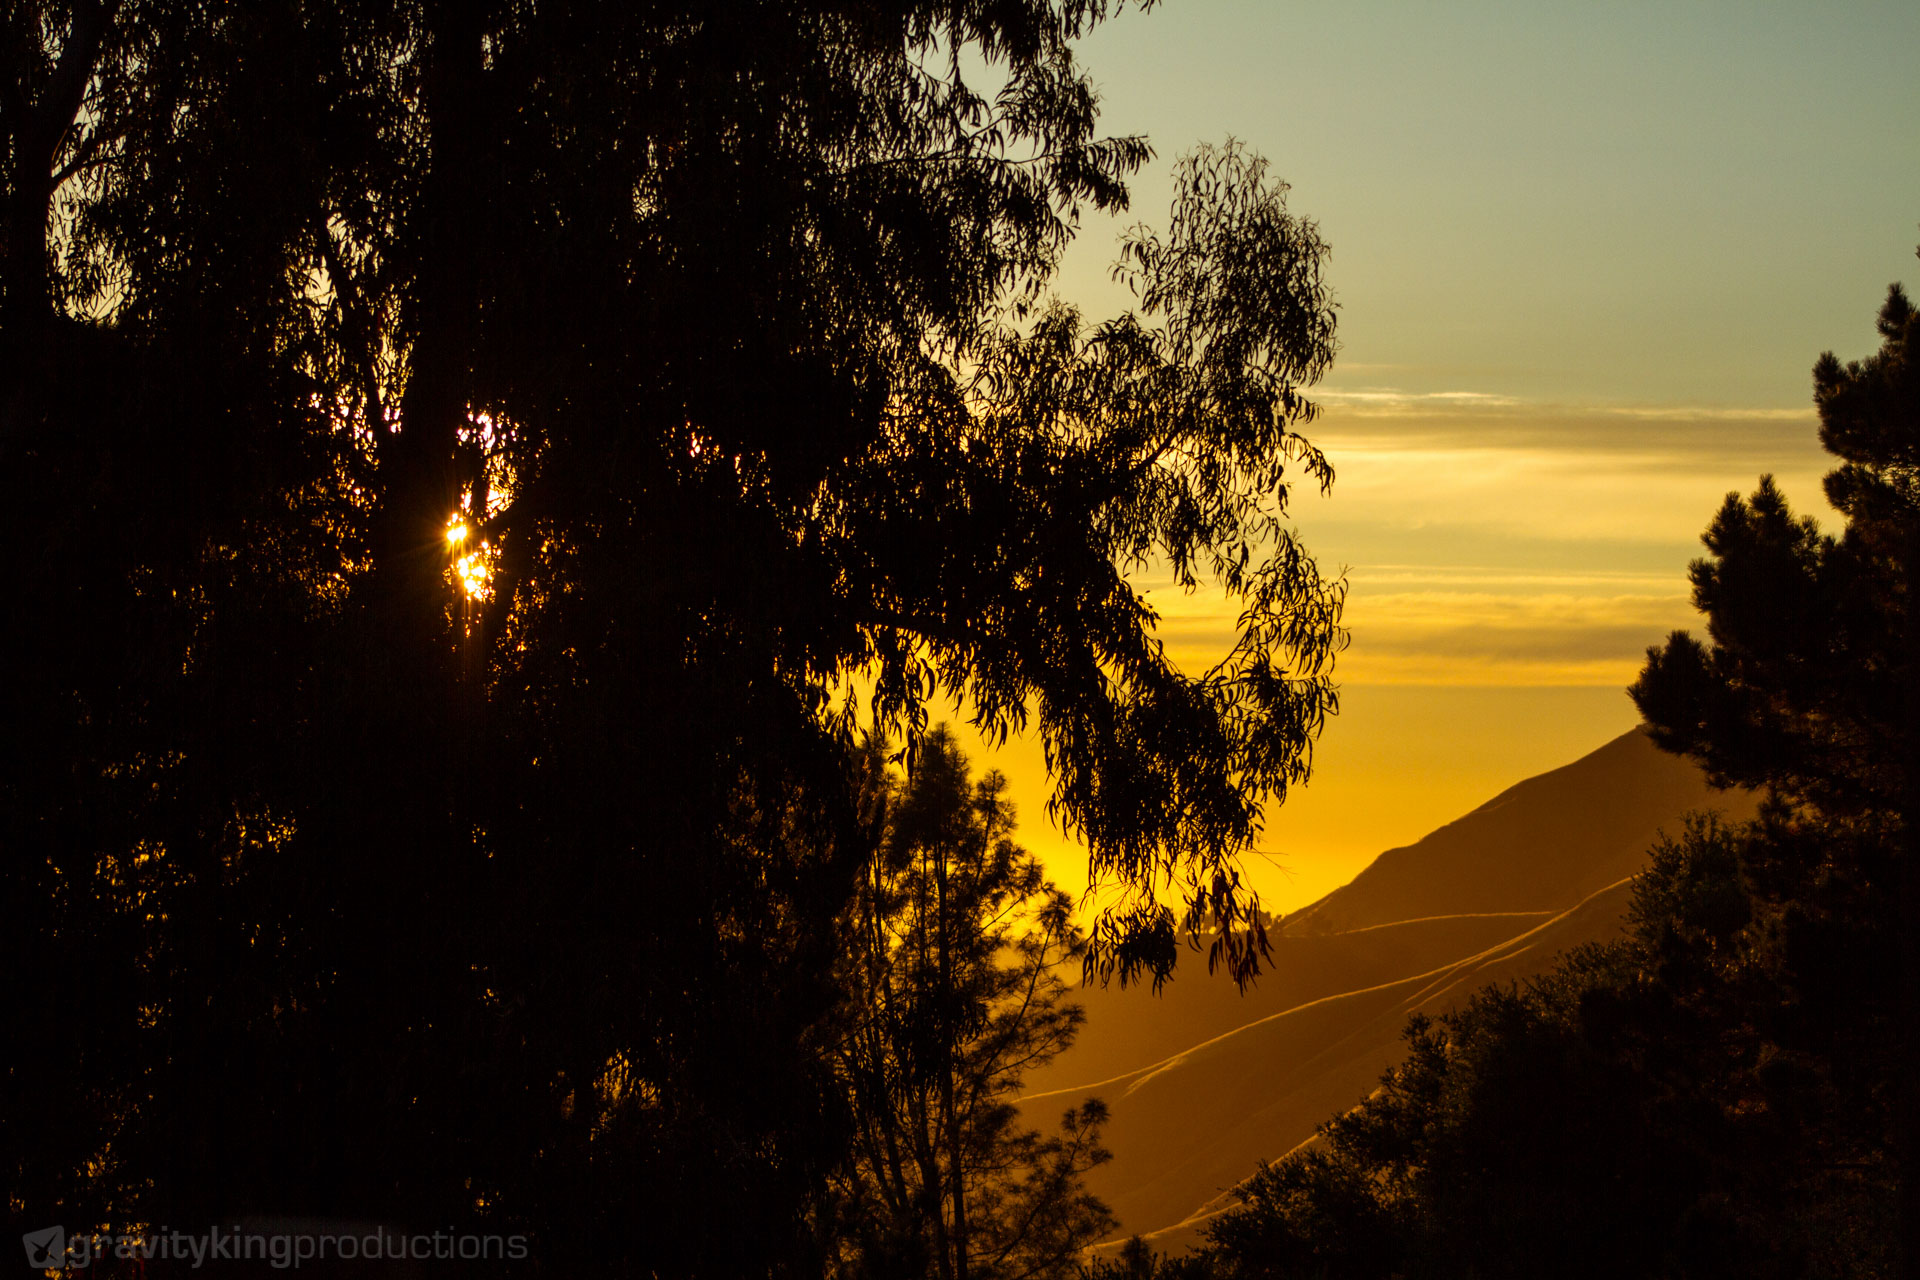 Golden sunset high above Big Sur. Makes it clear why it's called the 'Golden Coast'.